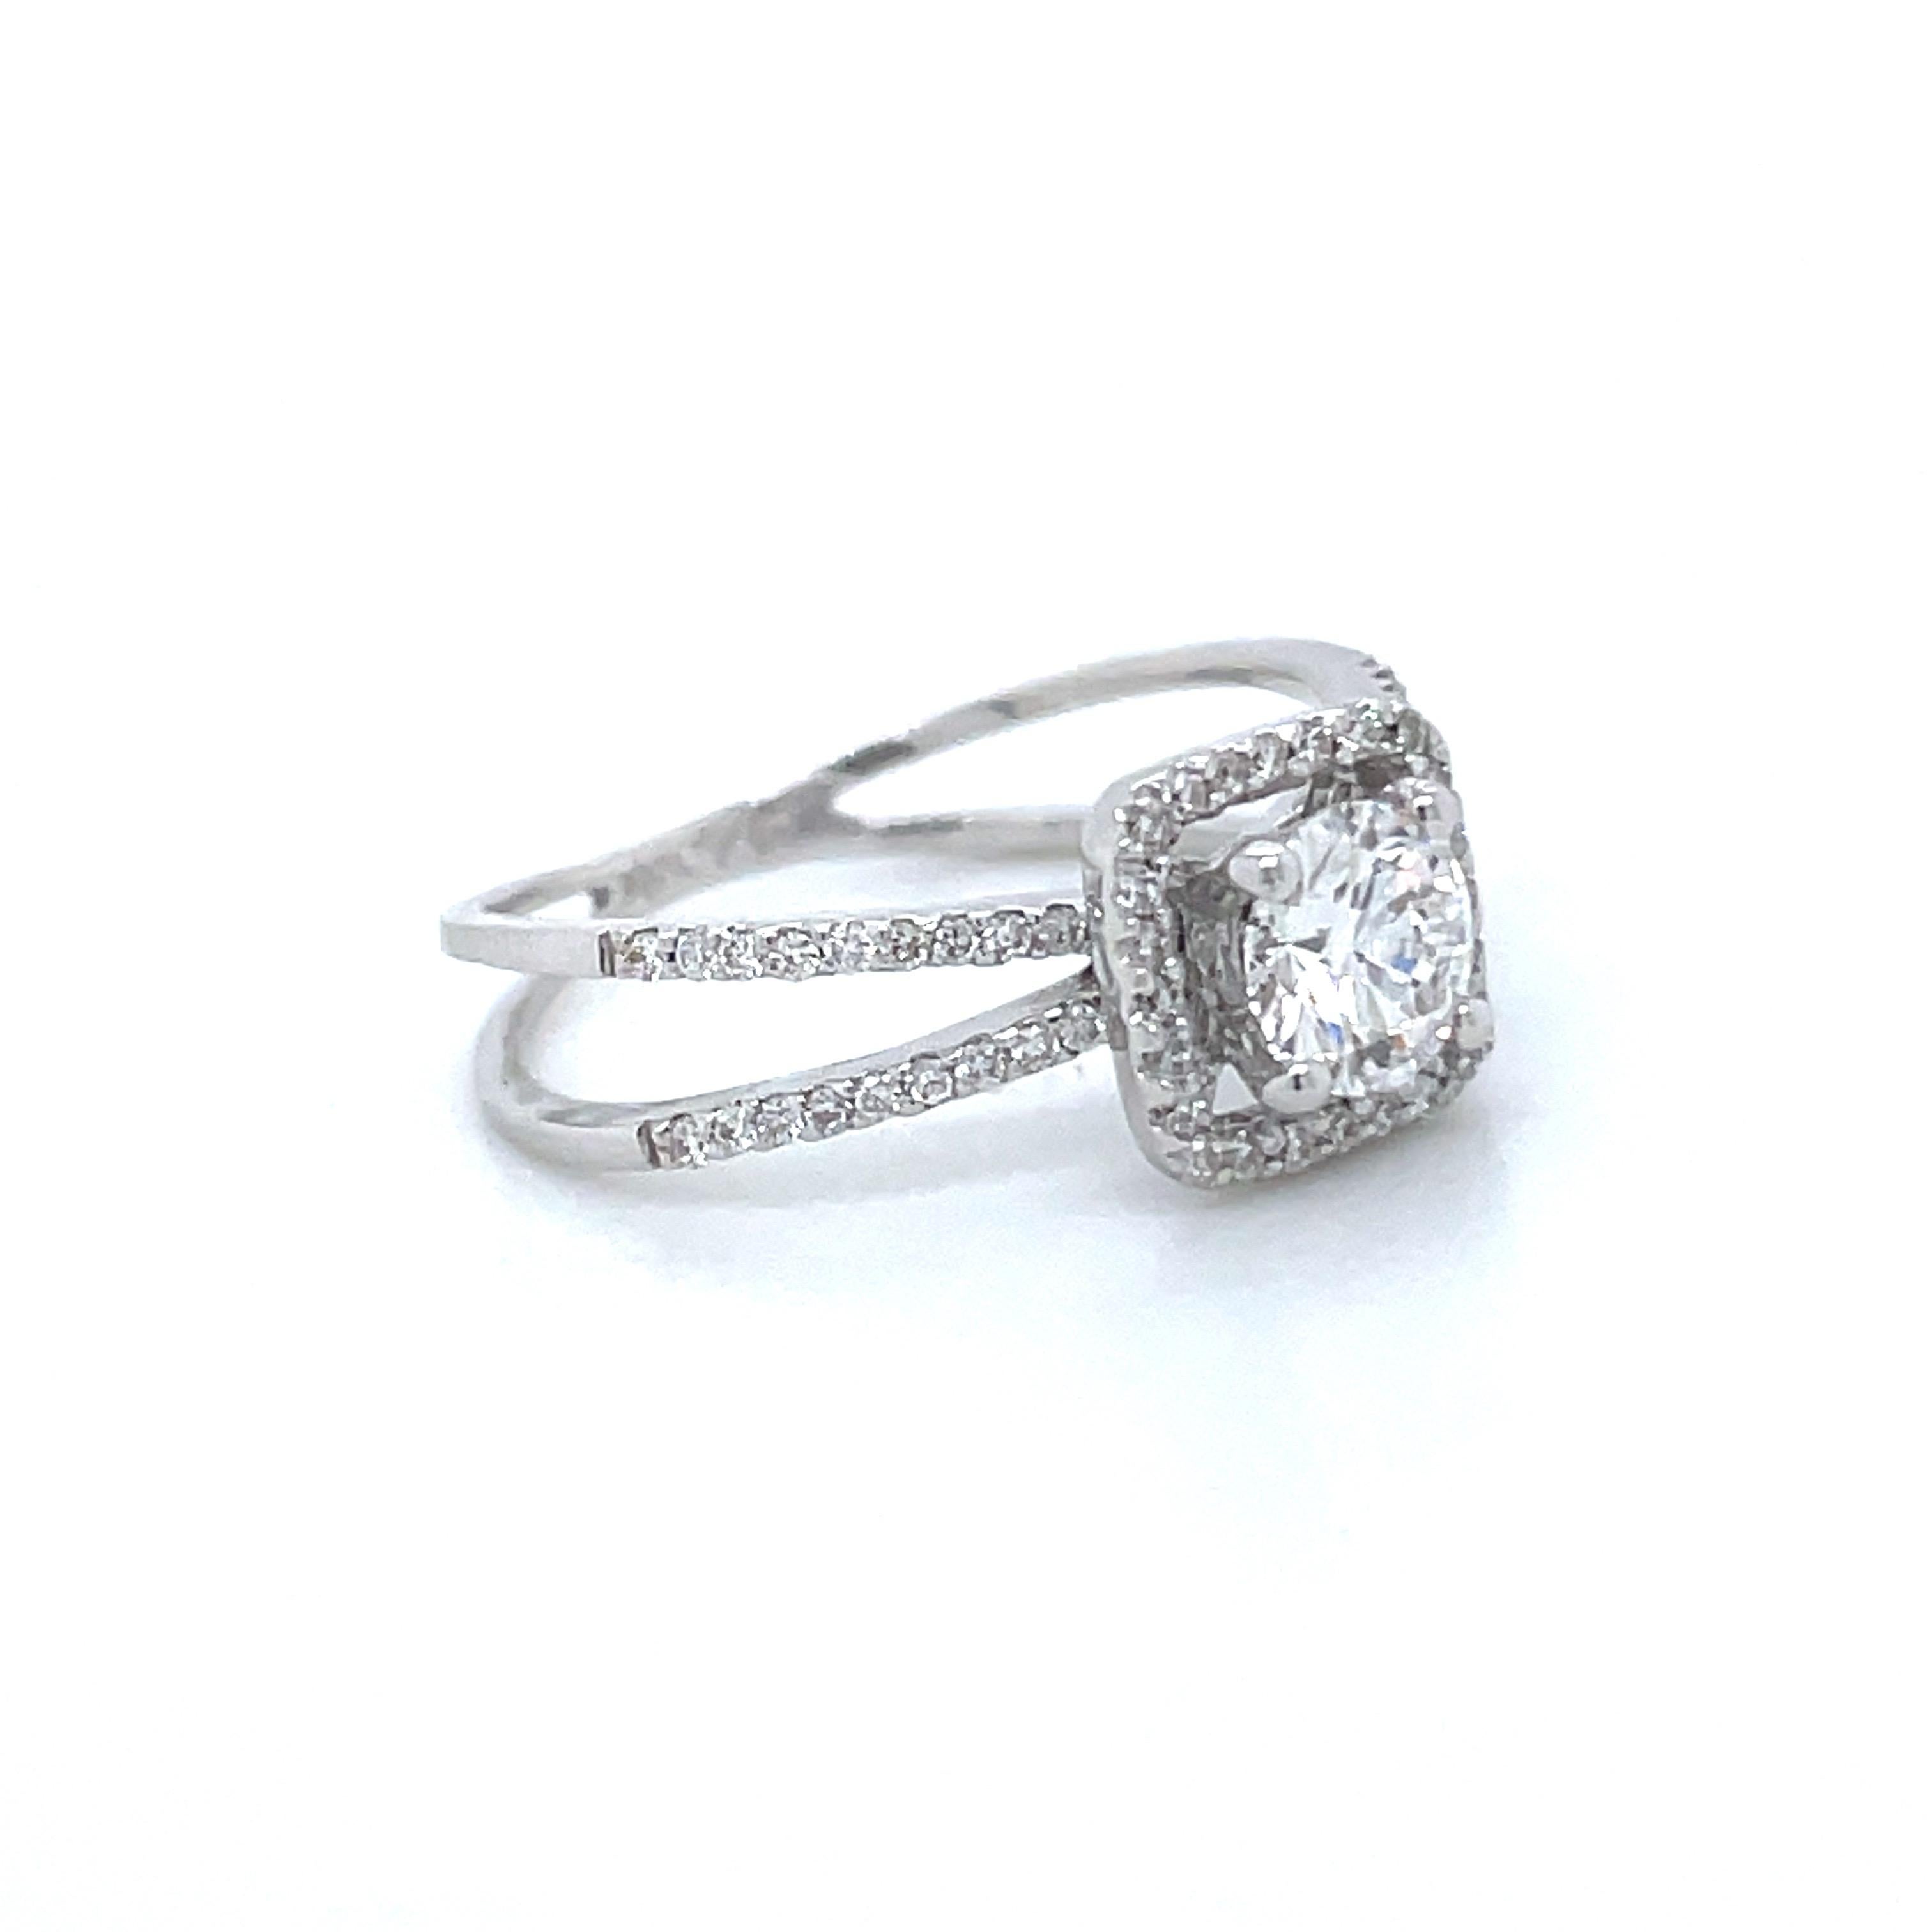 This 18k White Gold Round Brilliant Halo Engagement Ring whispers 